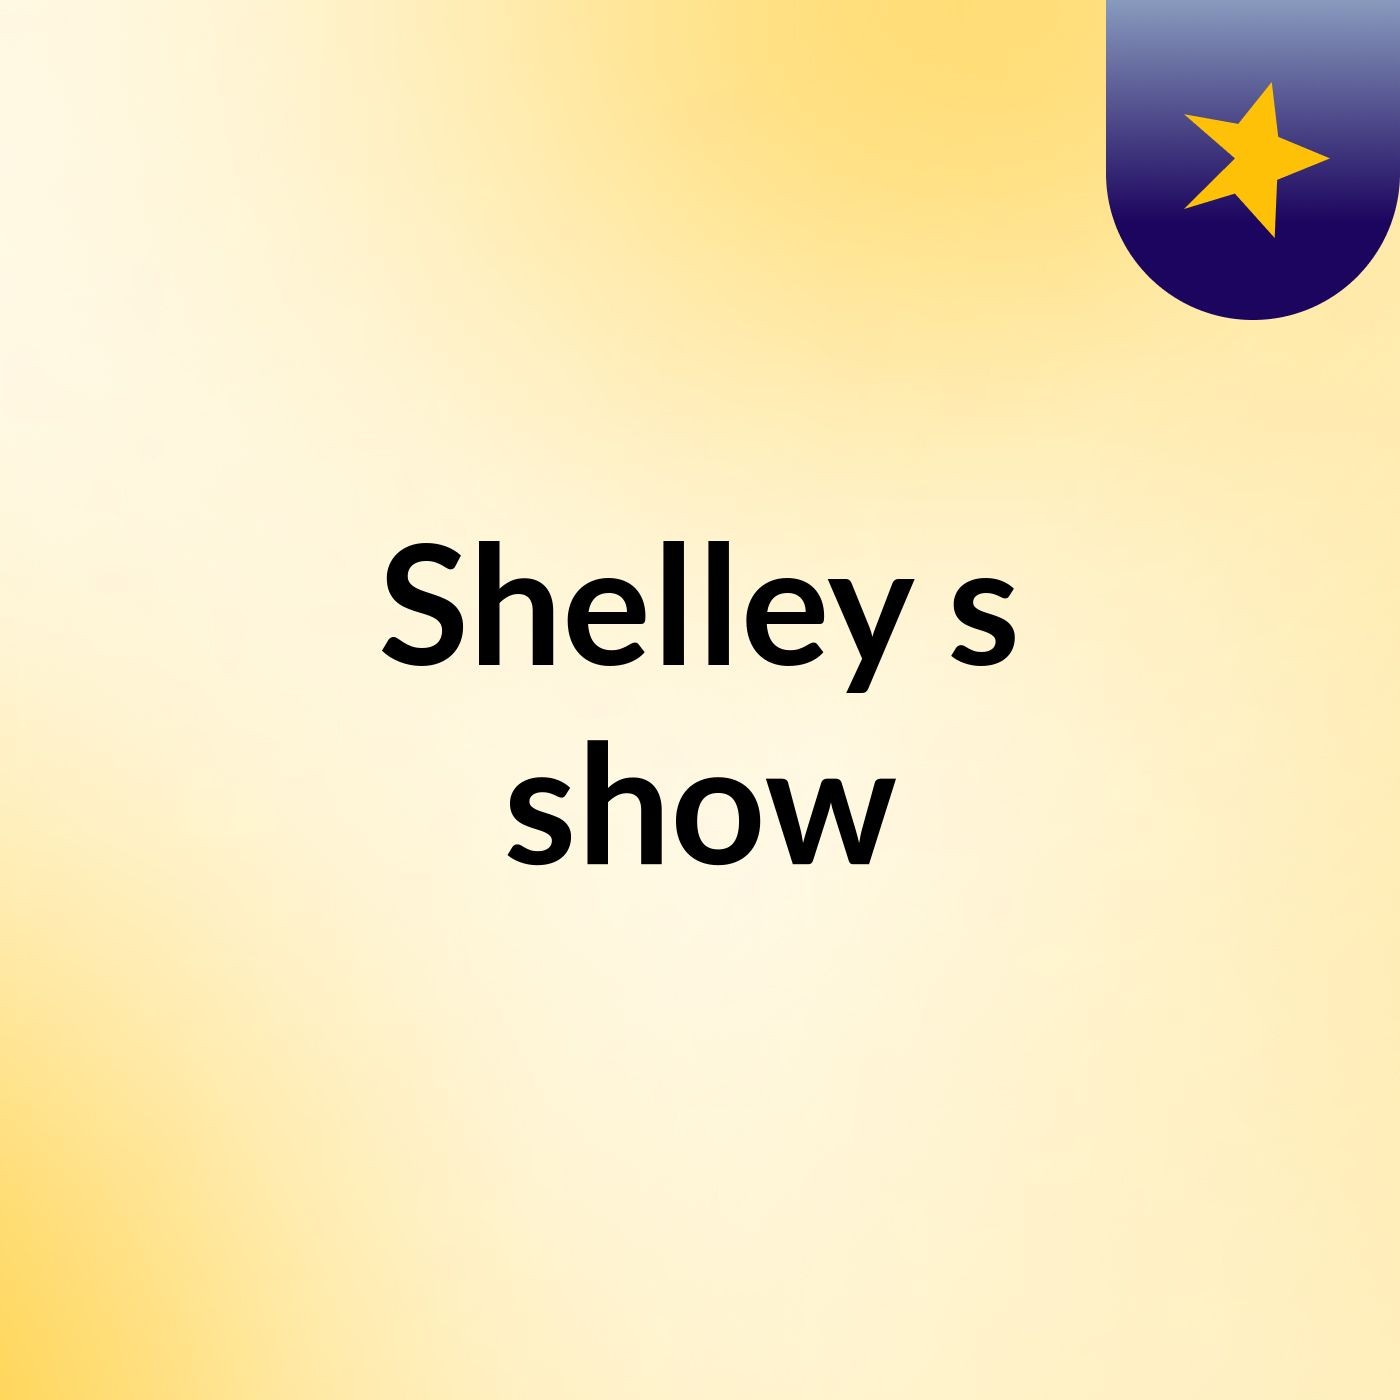 Shelley's show